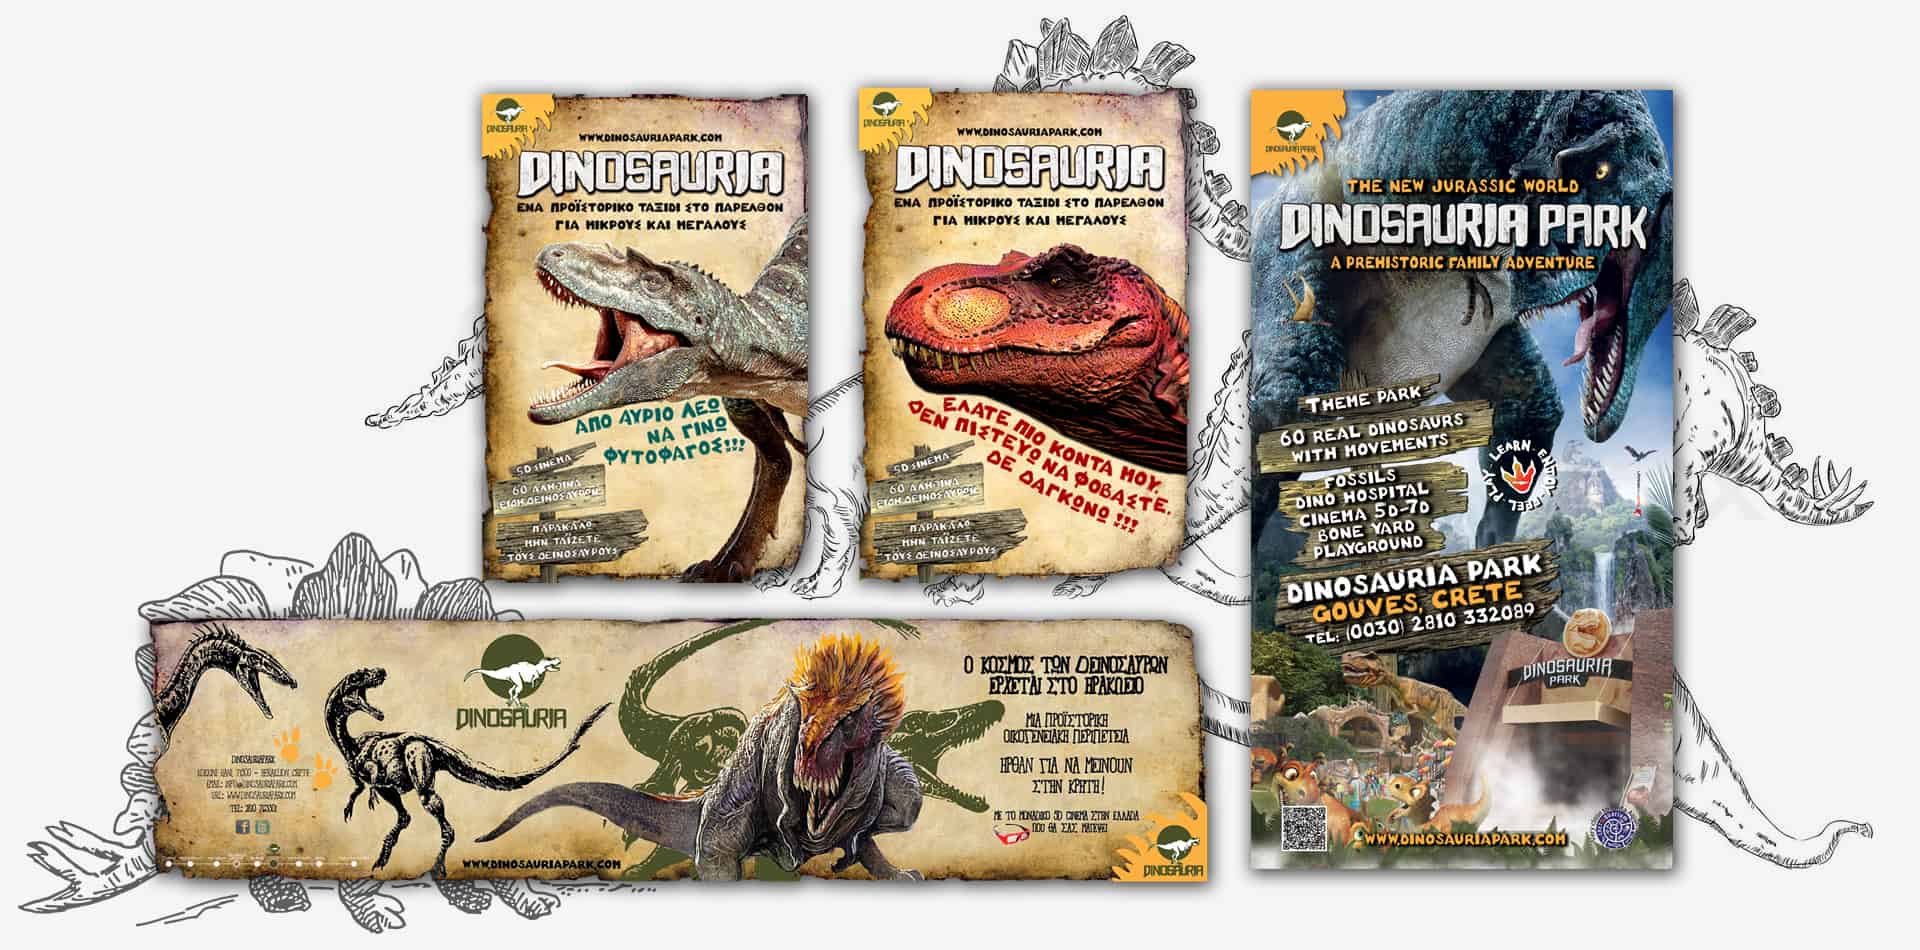 dinosauria park posters graphics concepts